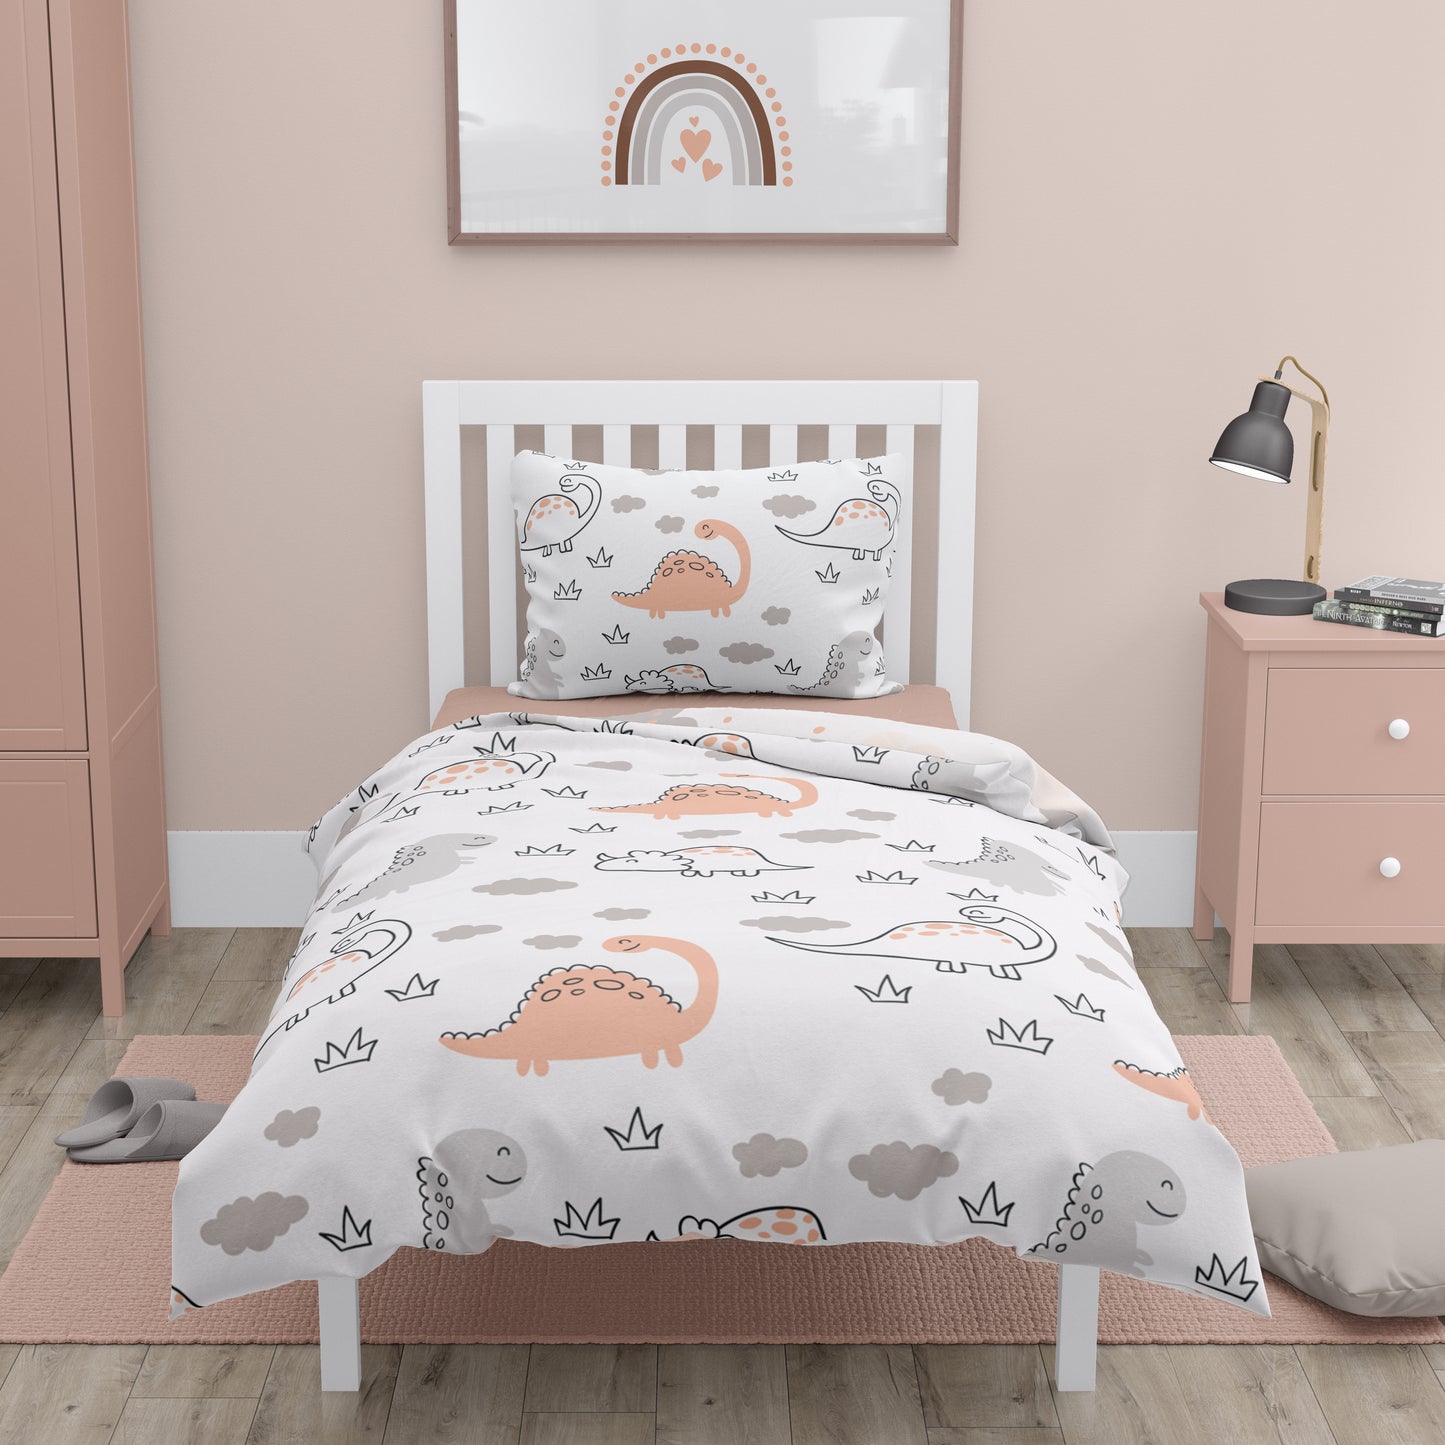 Elli Junior - 100% Organic Double Sided Duvet Cover Set Dino/Cloud (full size bed)